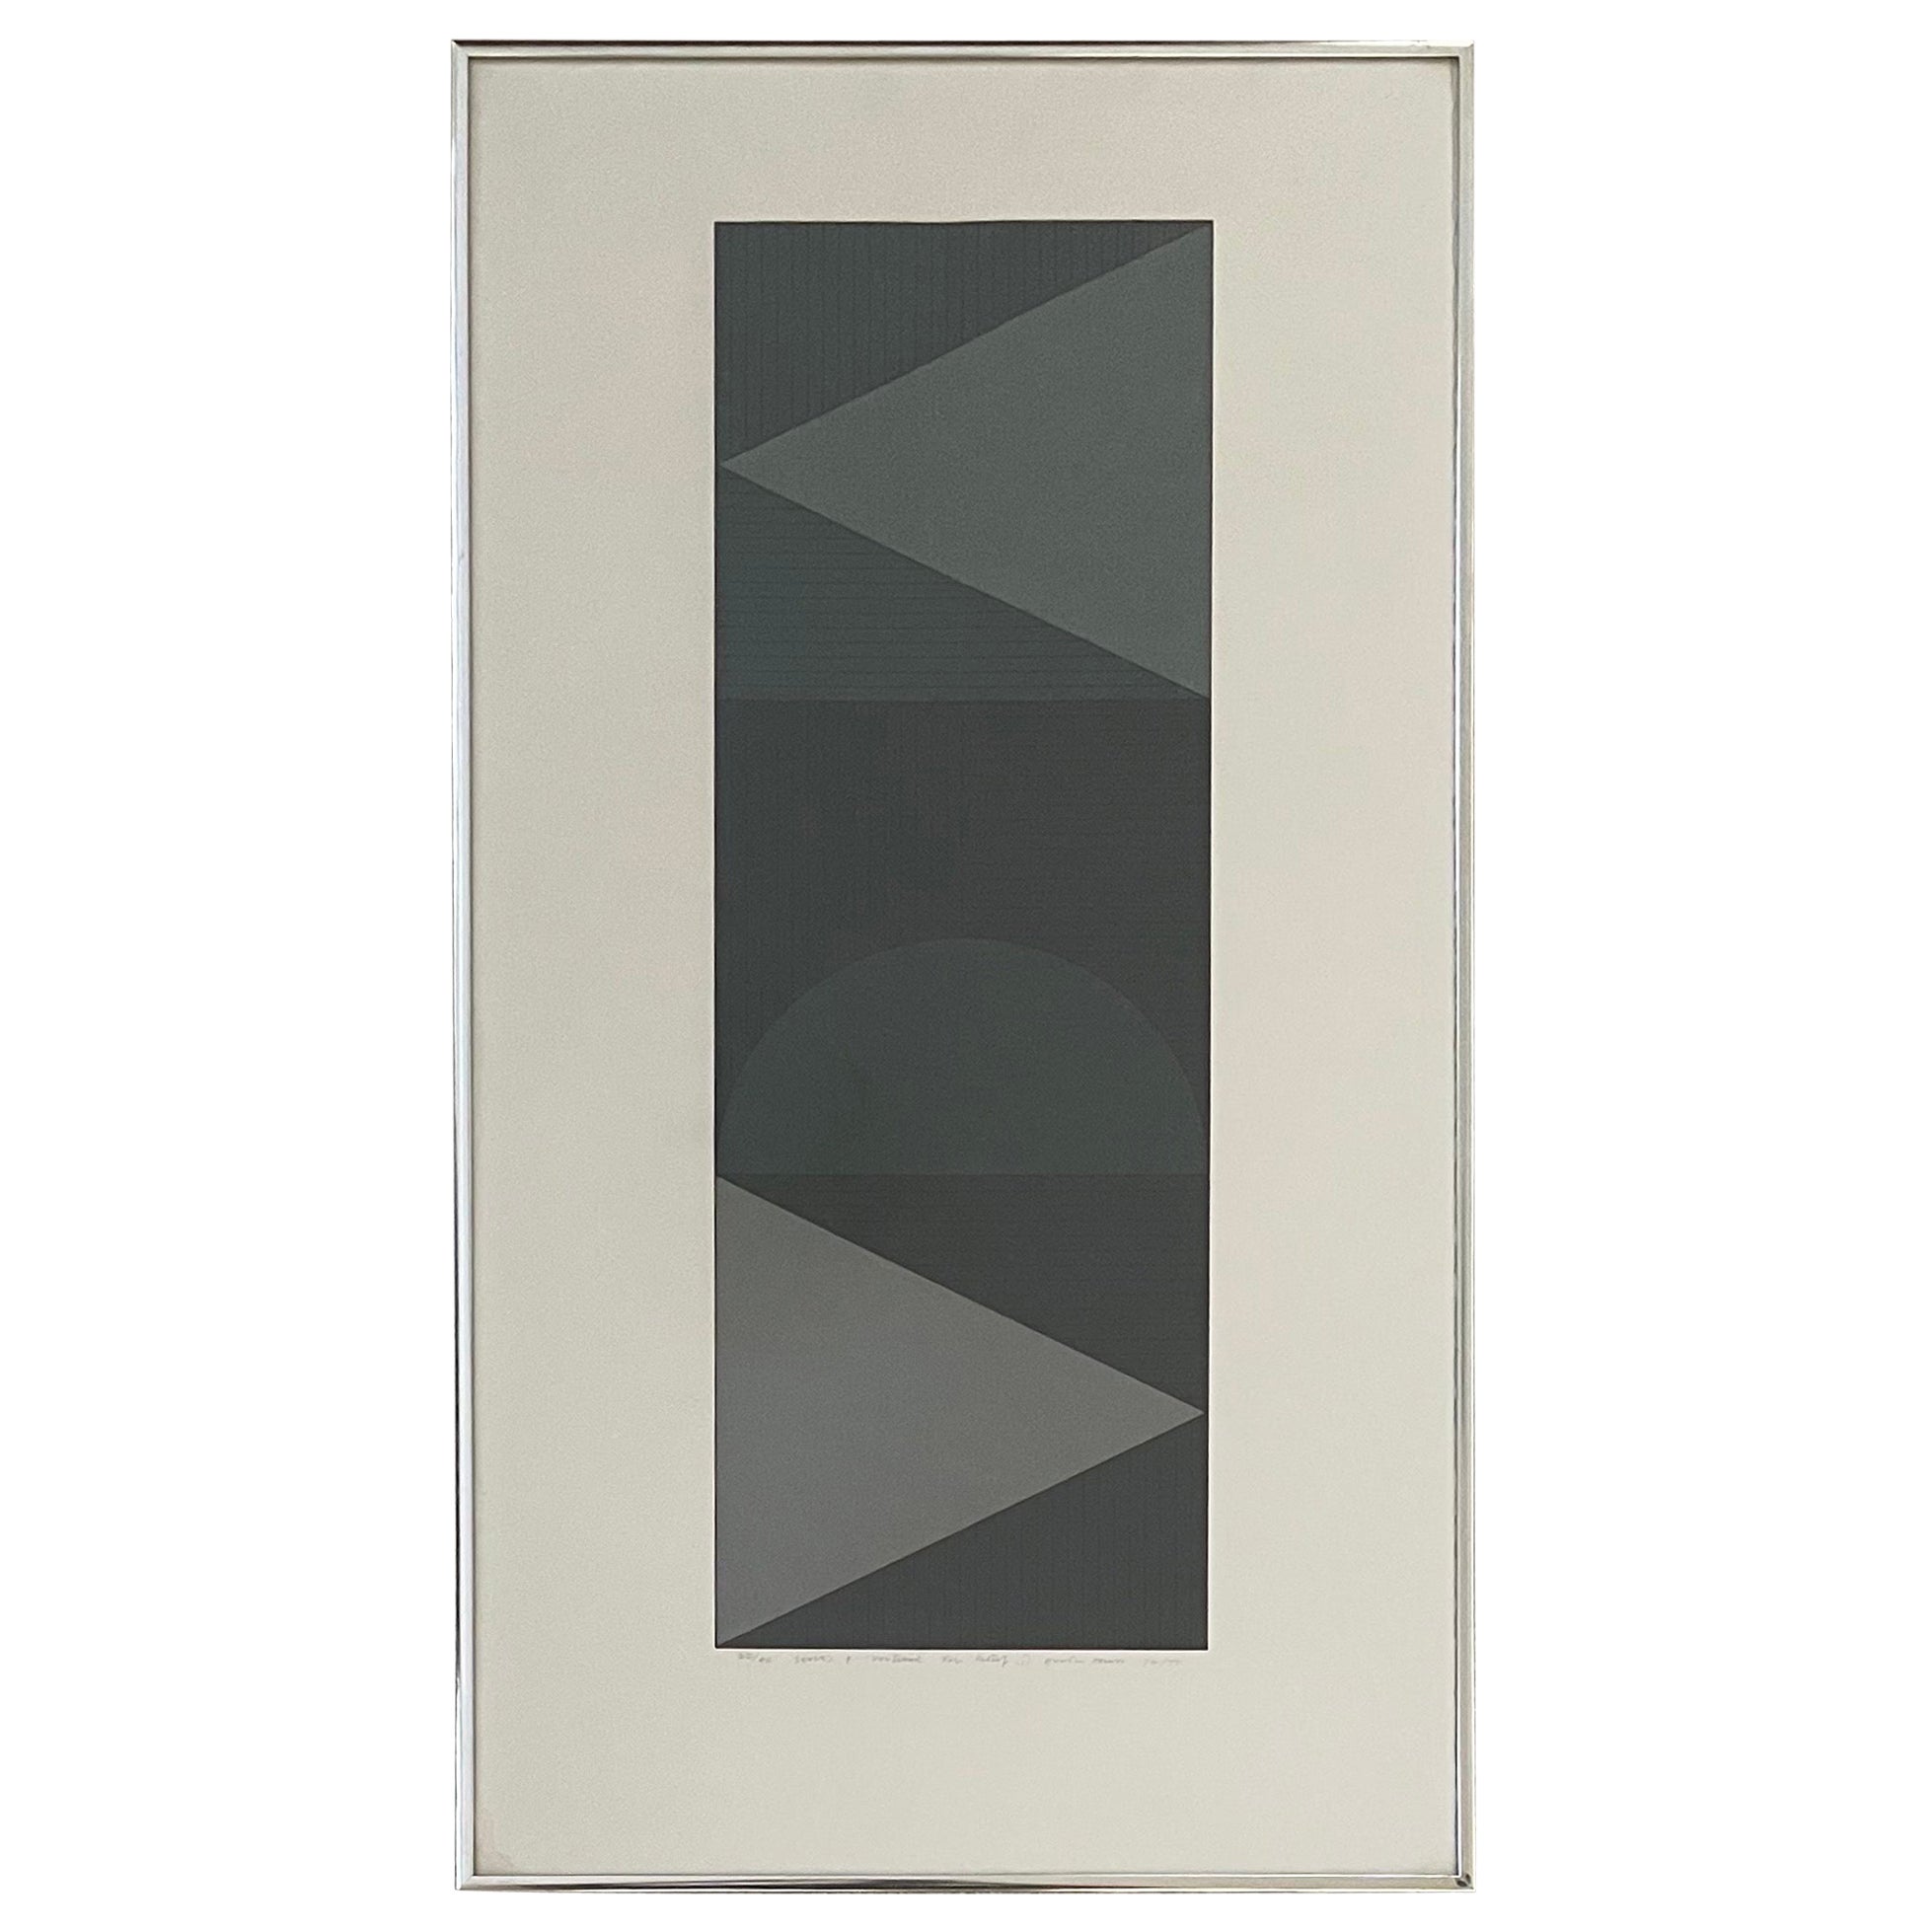 Abstract Screen Print Entitled "Series 8 Vertical Tri Motif i " by Gordon House For Sale